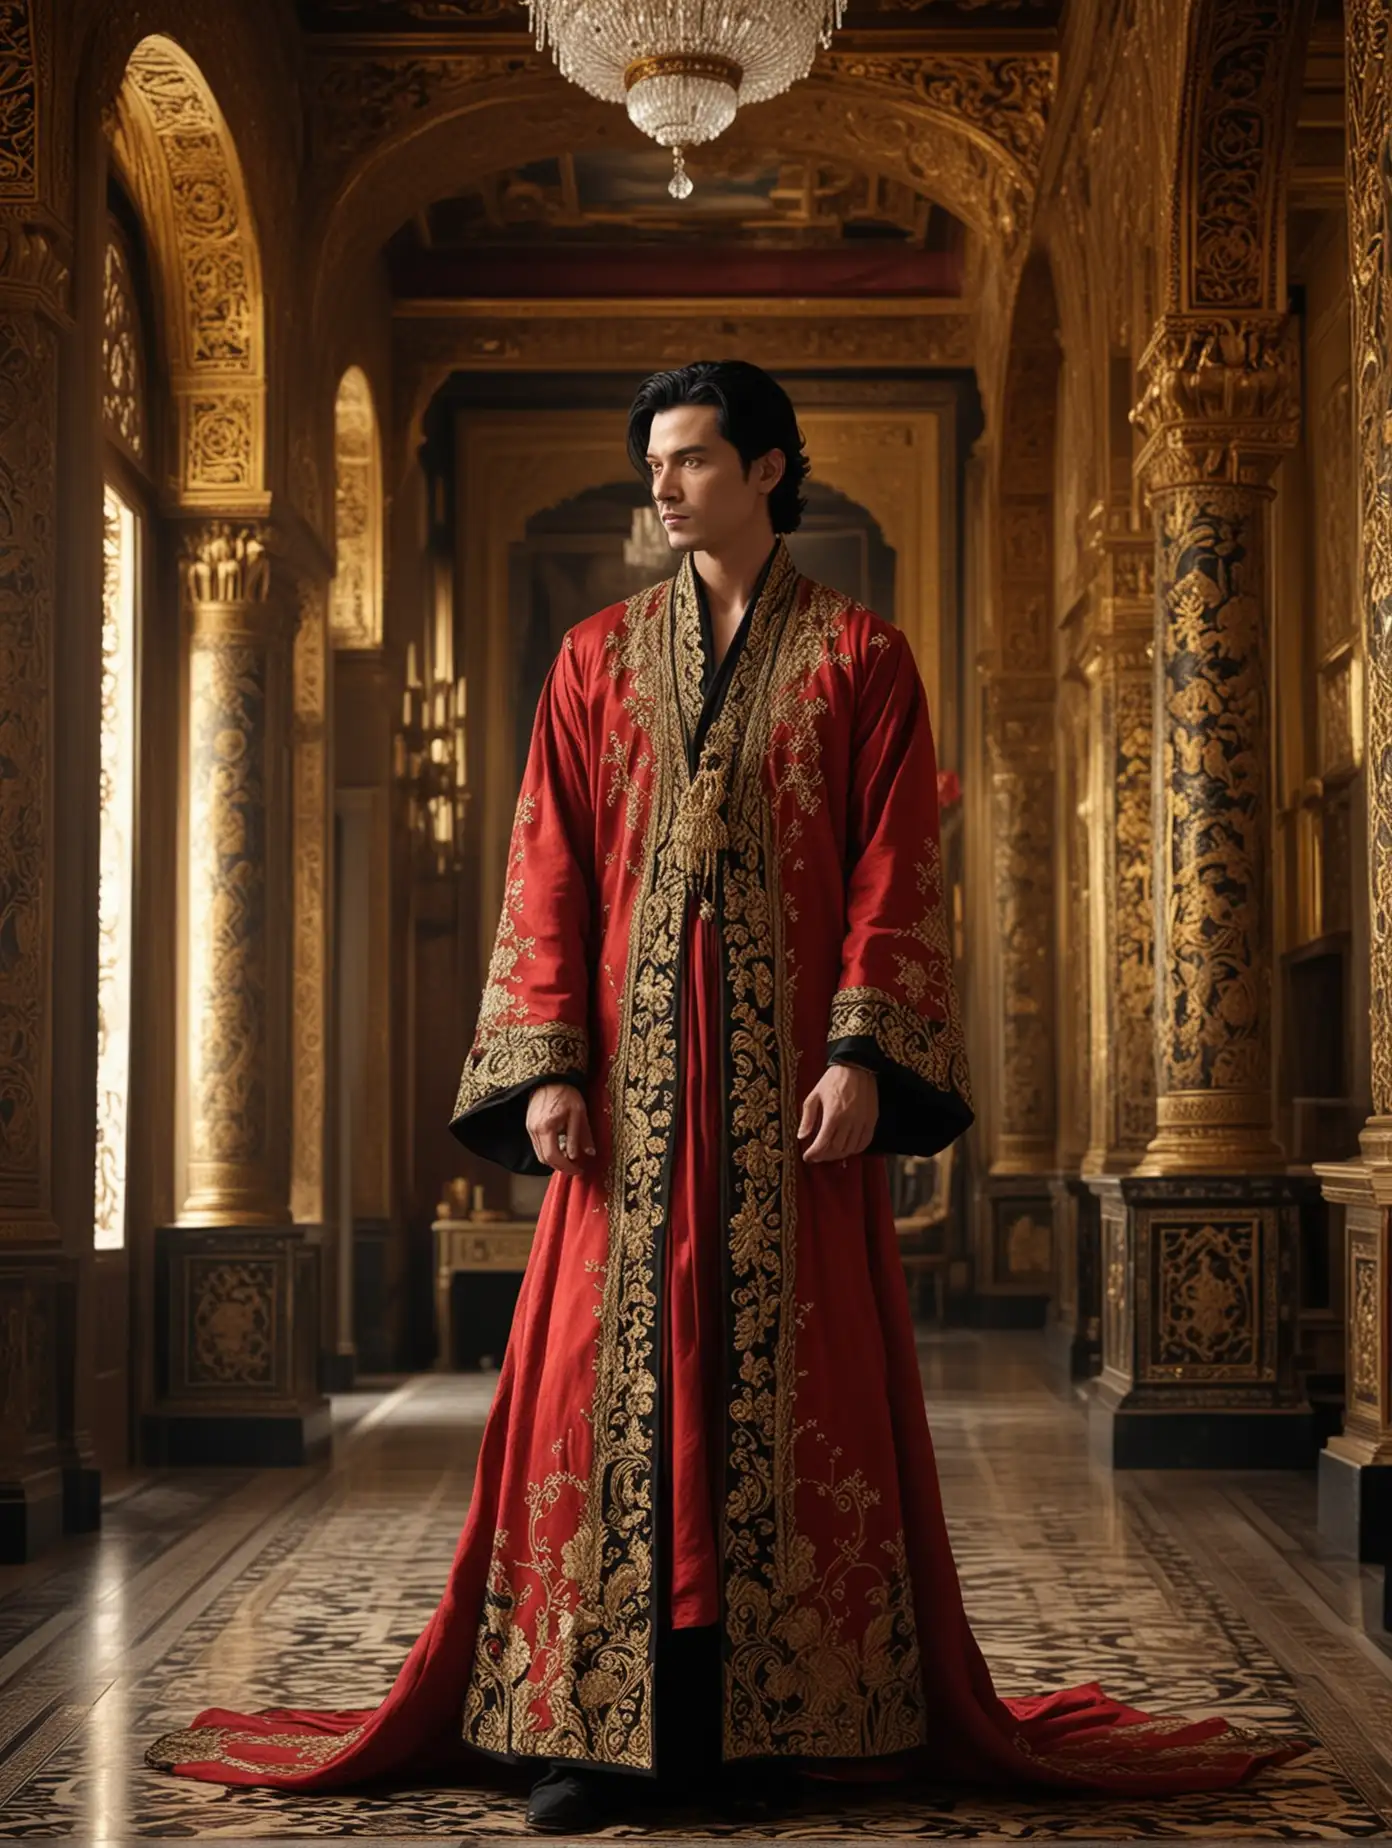 A handsome, masculine man with waist-length black hair stands in a golden palace. He is adorned in a grand red robe that drapes elegantly over his broad shoulders, the rich fabric contrasting vividly with the opulent surroundings. The robe, adorned with intricate golden embroidery, flows gracefully to the floor, enhancing his regal presence. The palace itself gleams with rich, golden hues, intricate designs, and lavish decor, complementing the man's striking appearance as he exudes an aura of strength and elegance, his hair flowing like a dark waterfall against the shimmering backdrop.